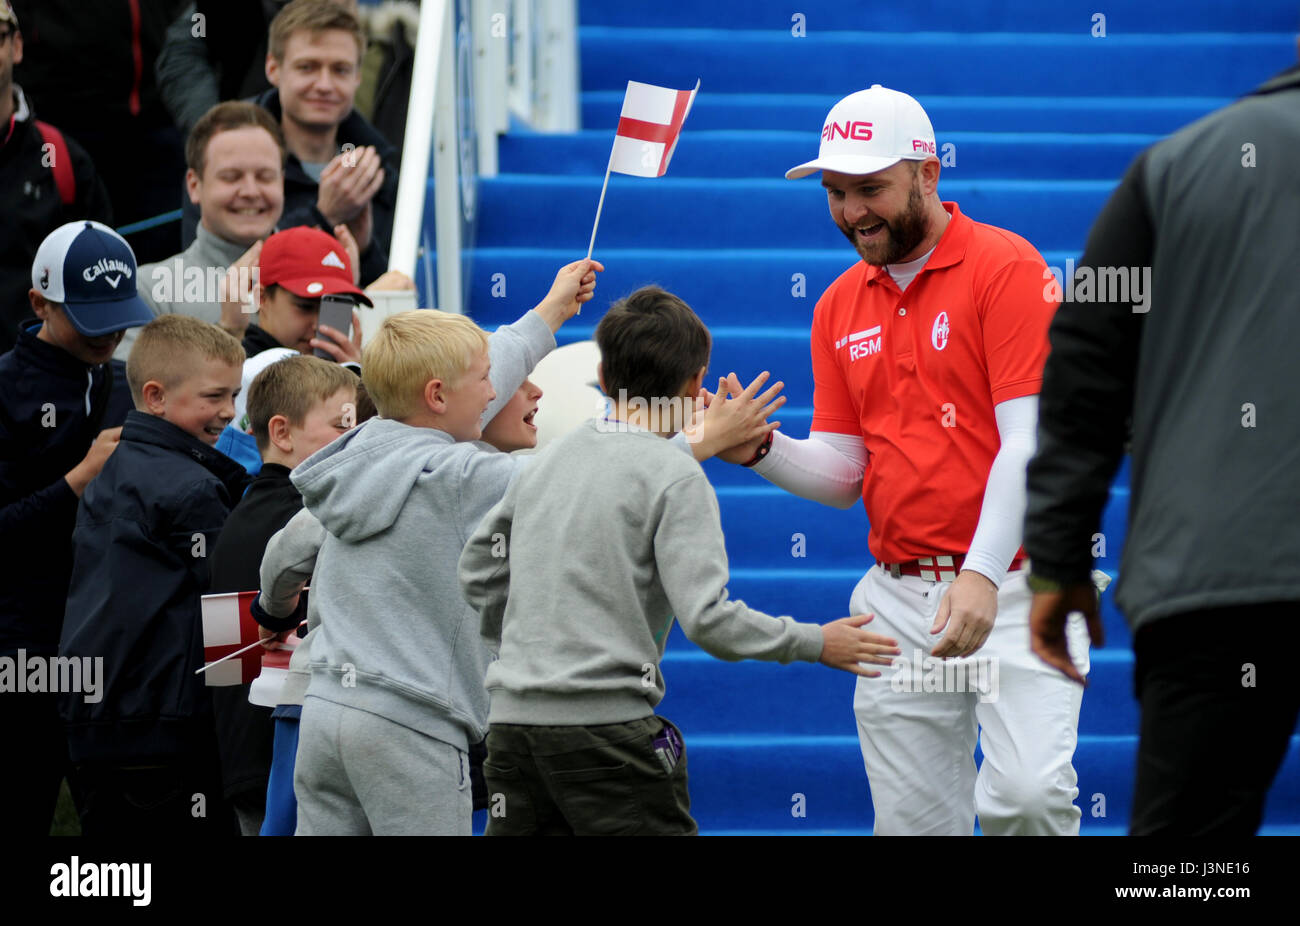 ST ALBANS, ENGLAND - May 6th, 2017: ANDY SULLIVAN, ENG high fives children as he enters the first tee arena during the GolfSixes at The Centurion Club on May 6, 2017 in St Albans, England. Credit: David Partridge/Alamy Live News Stock Photo